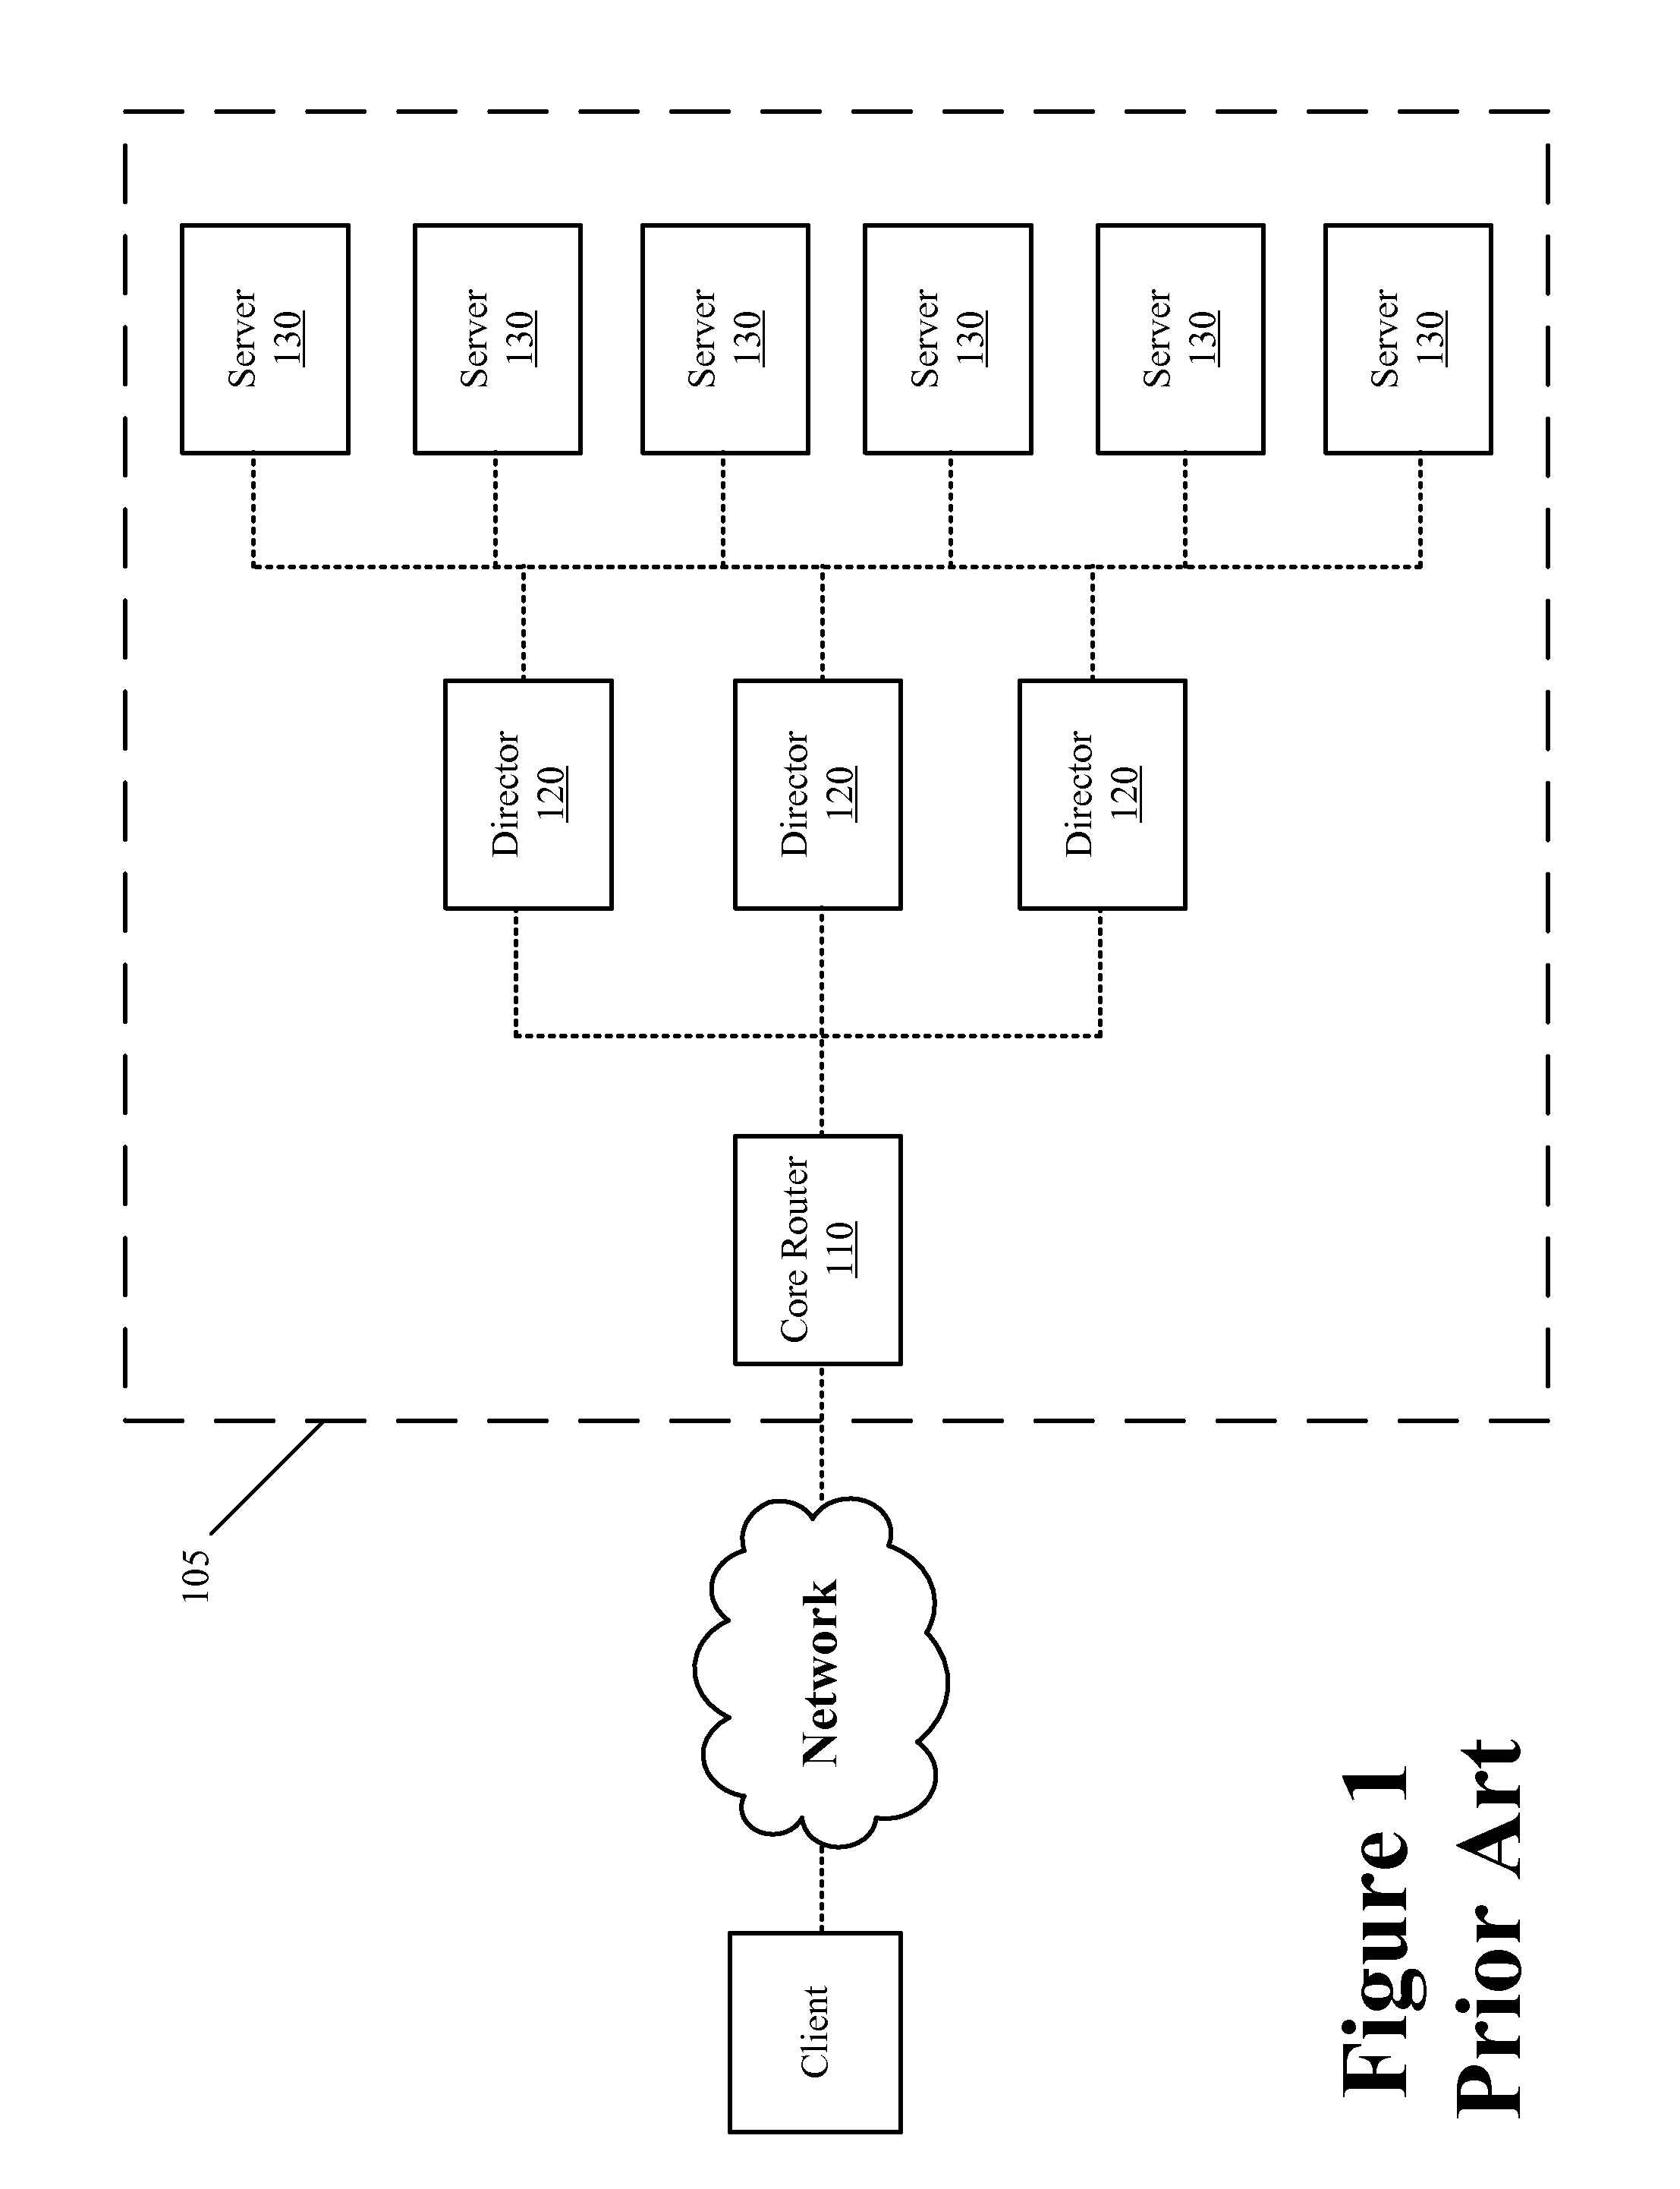 Network Connection Hand-off Using State Transformations